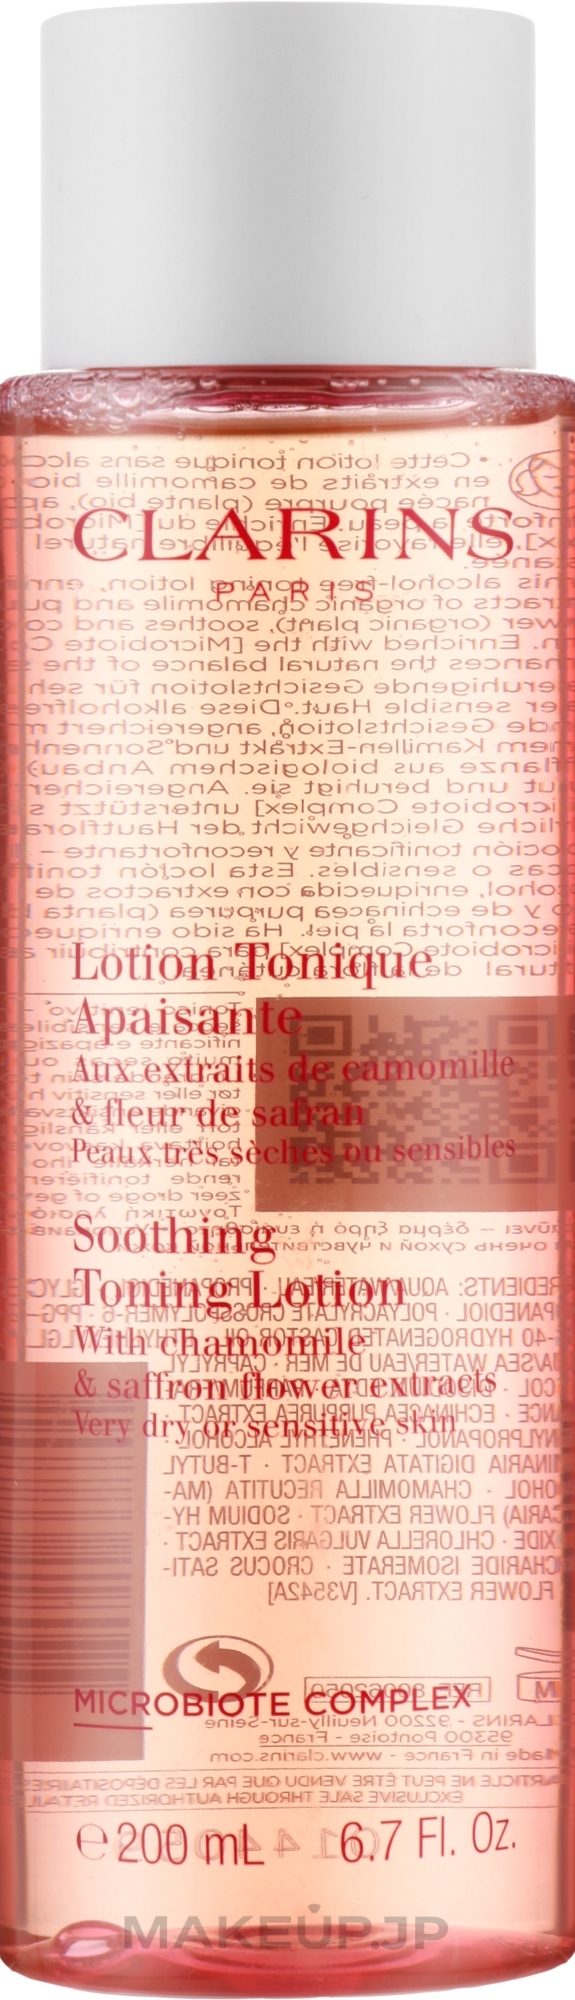 Soothing Toning Lotion for Very Dry & Sensitive Skin - Clarins Soothing Toning Lotion — photo 200 ml